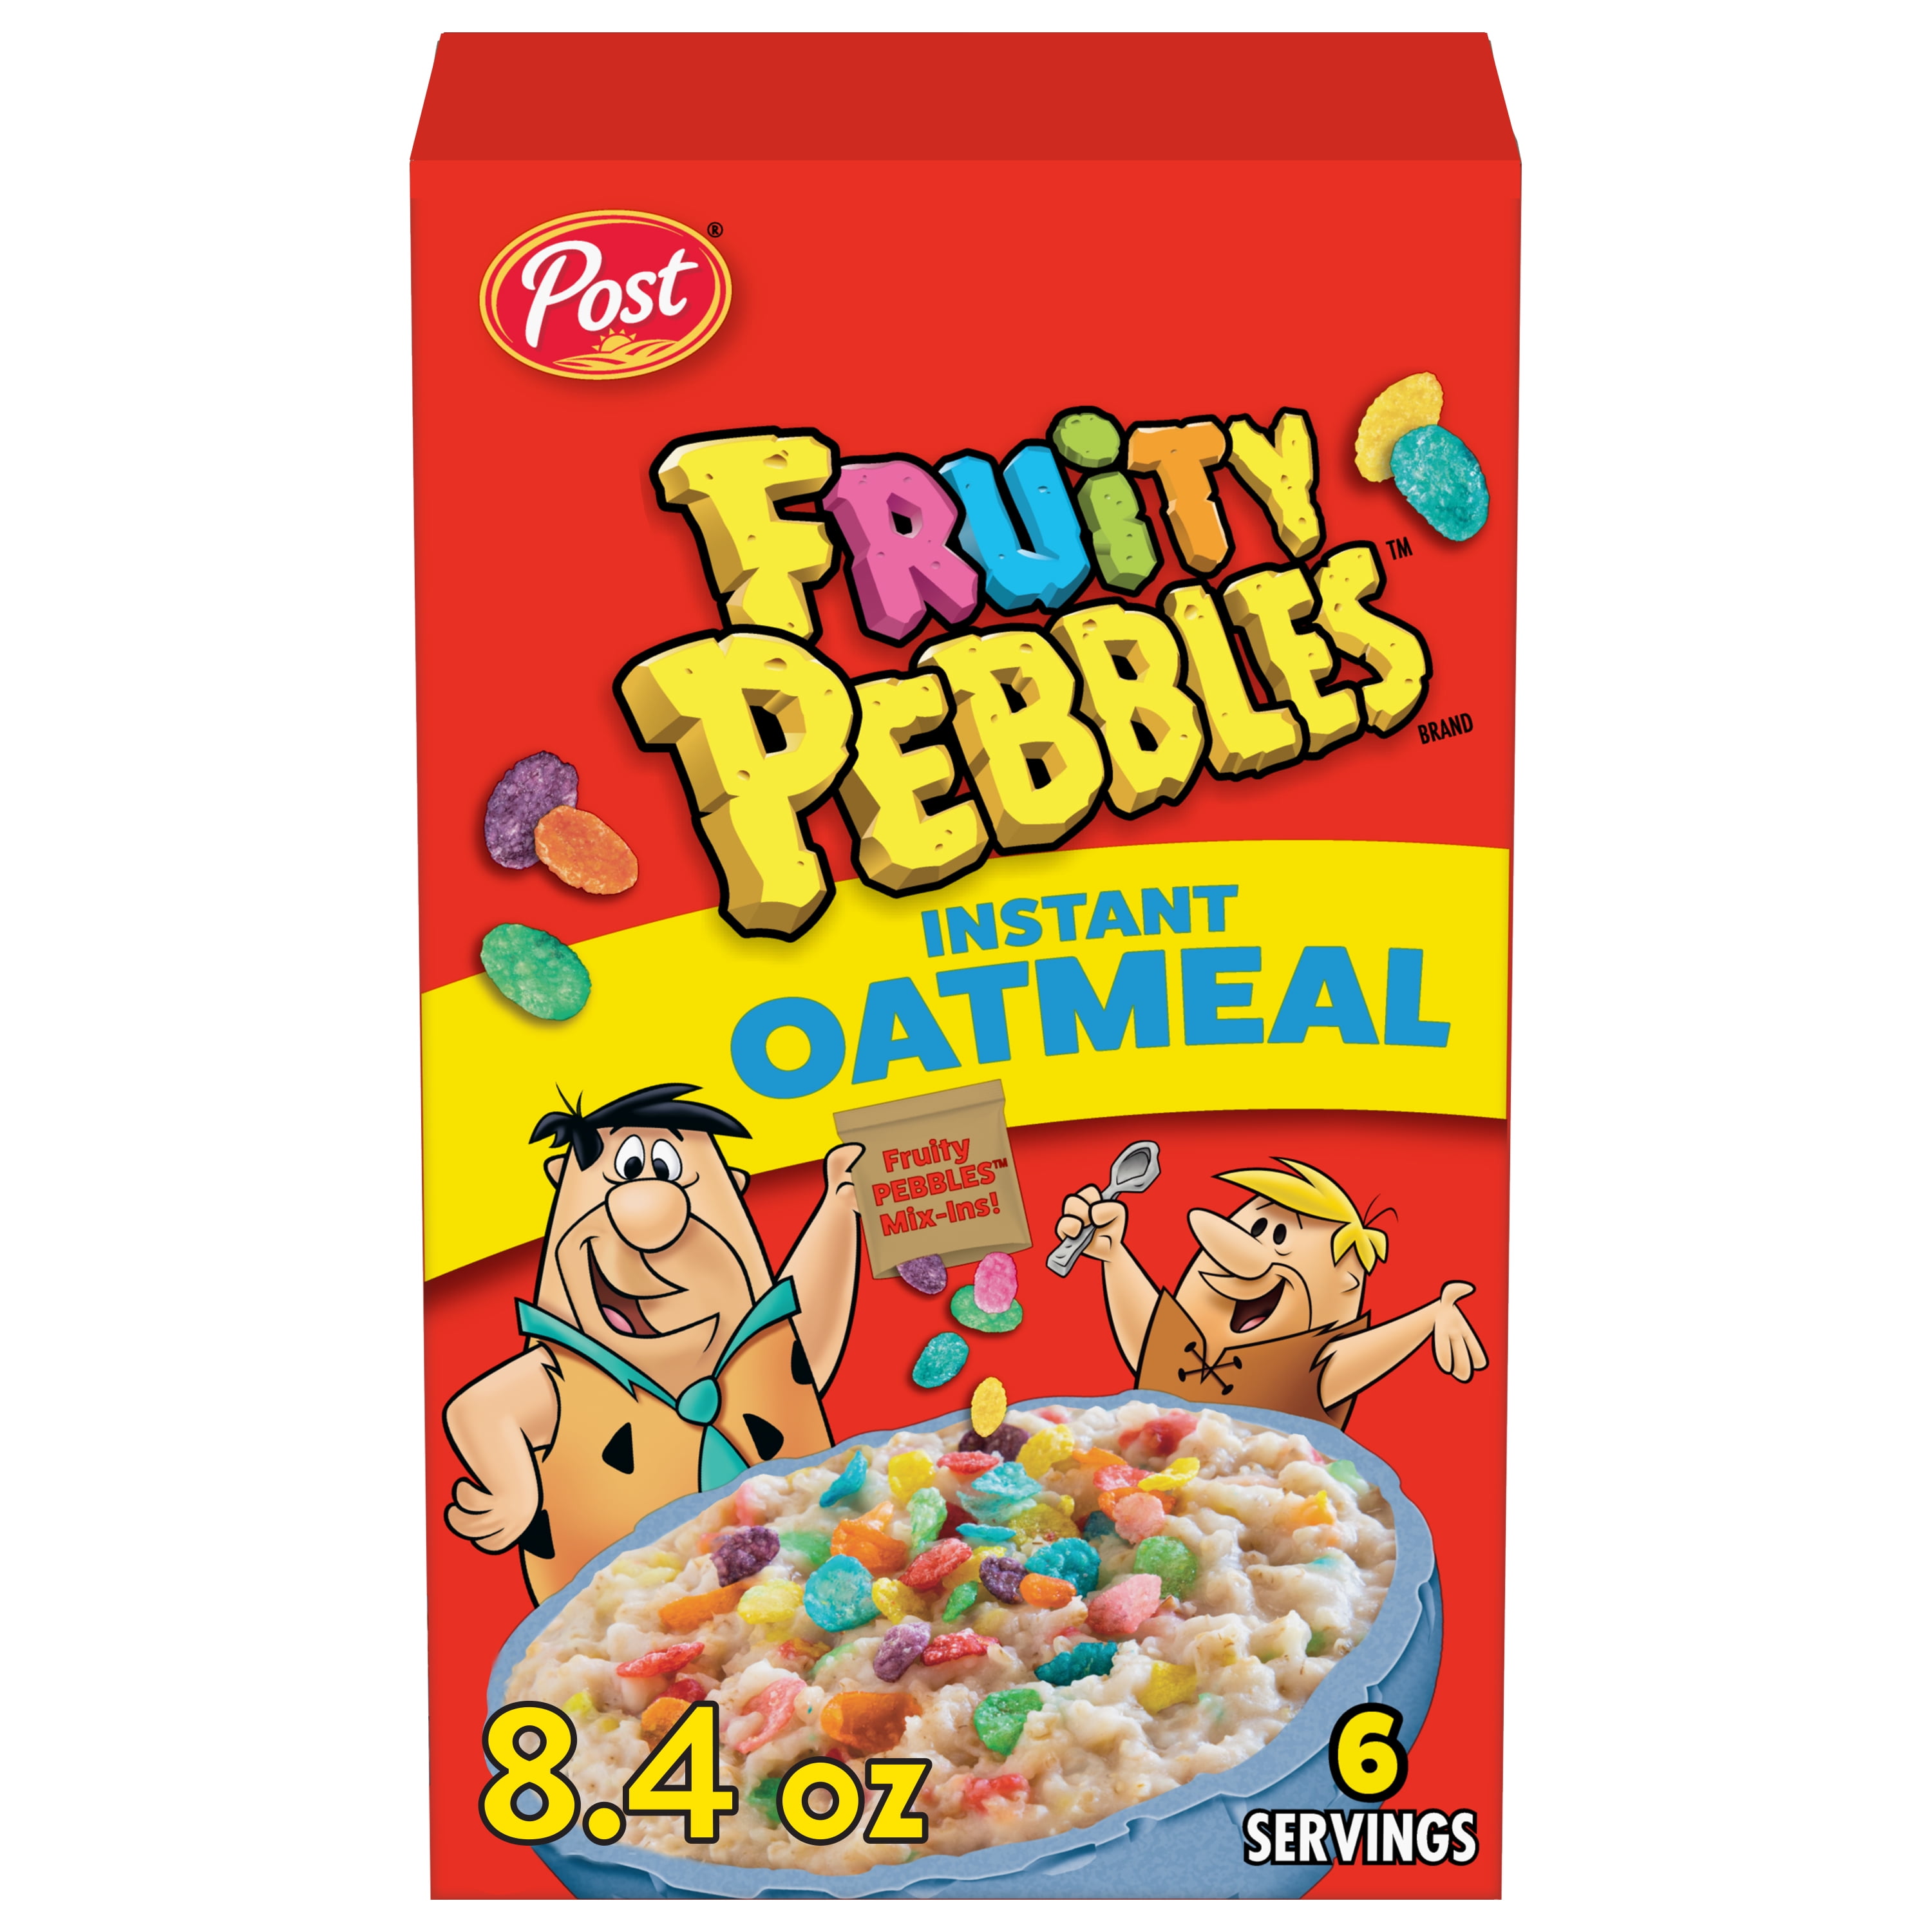 New Post Fruity PEBBLES Instant Oatmeal for Kids, 6 Oatmeal Packets, 8.4oz